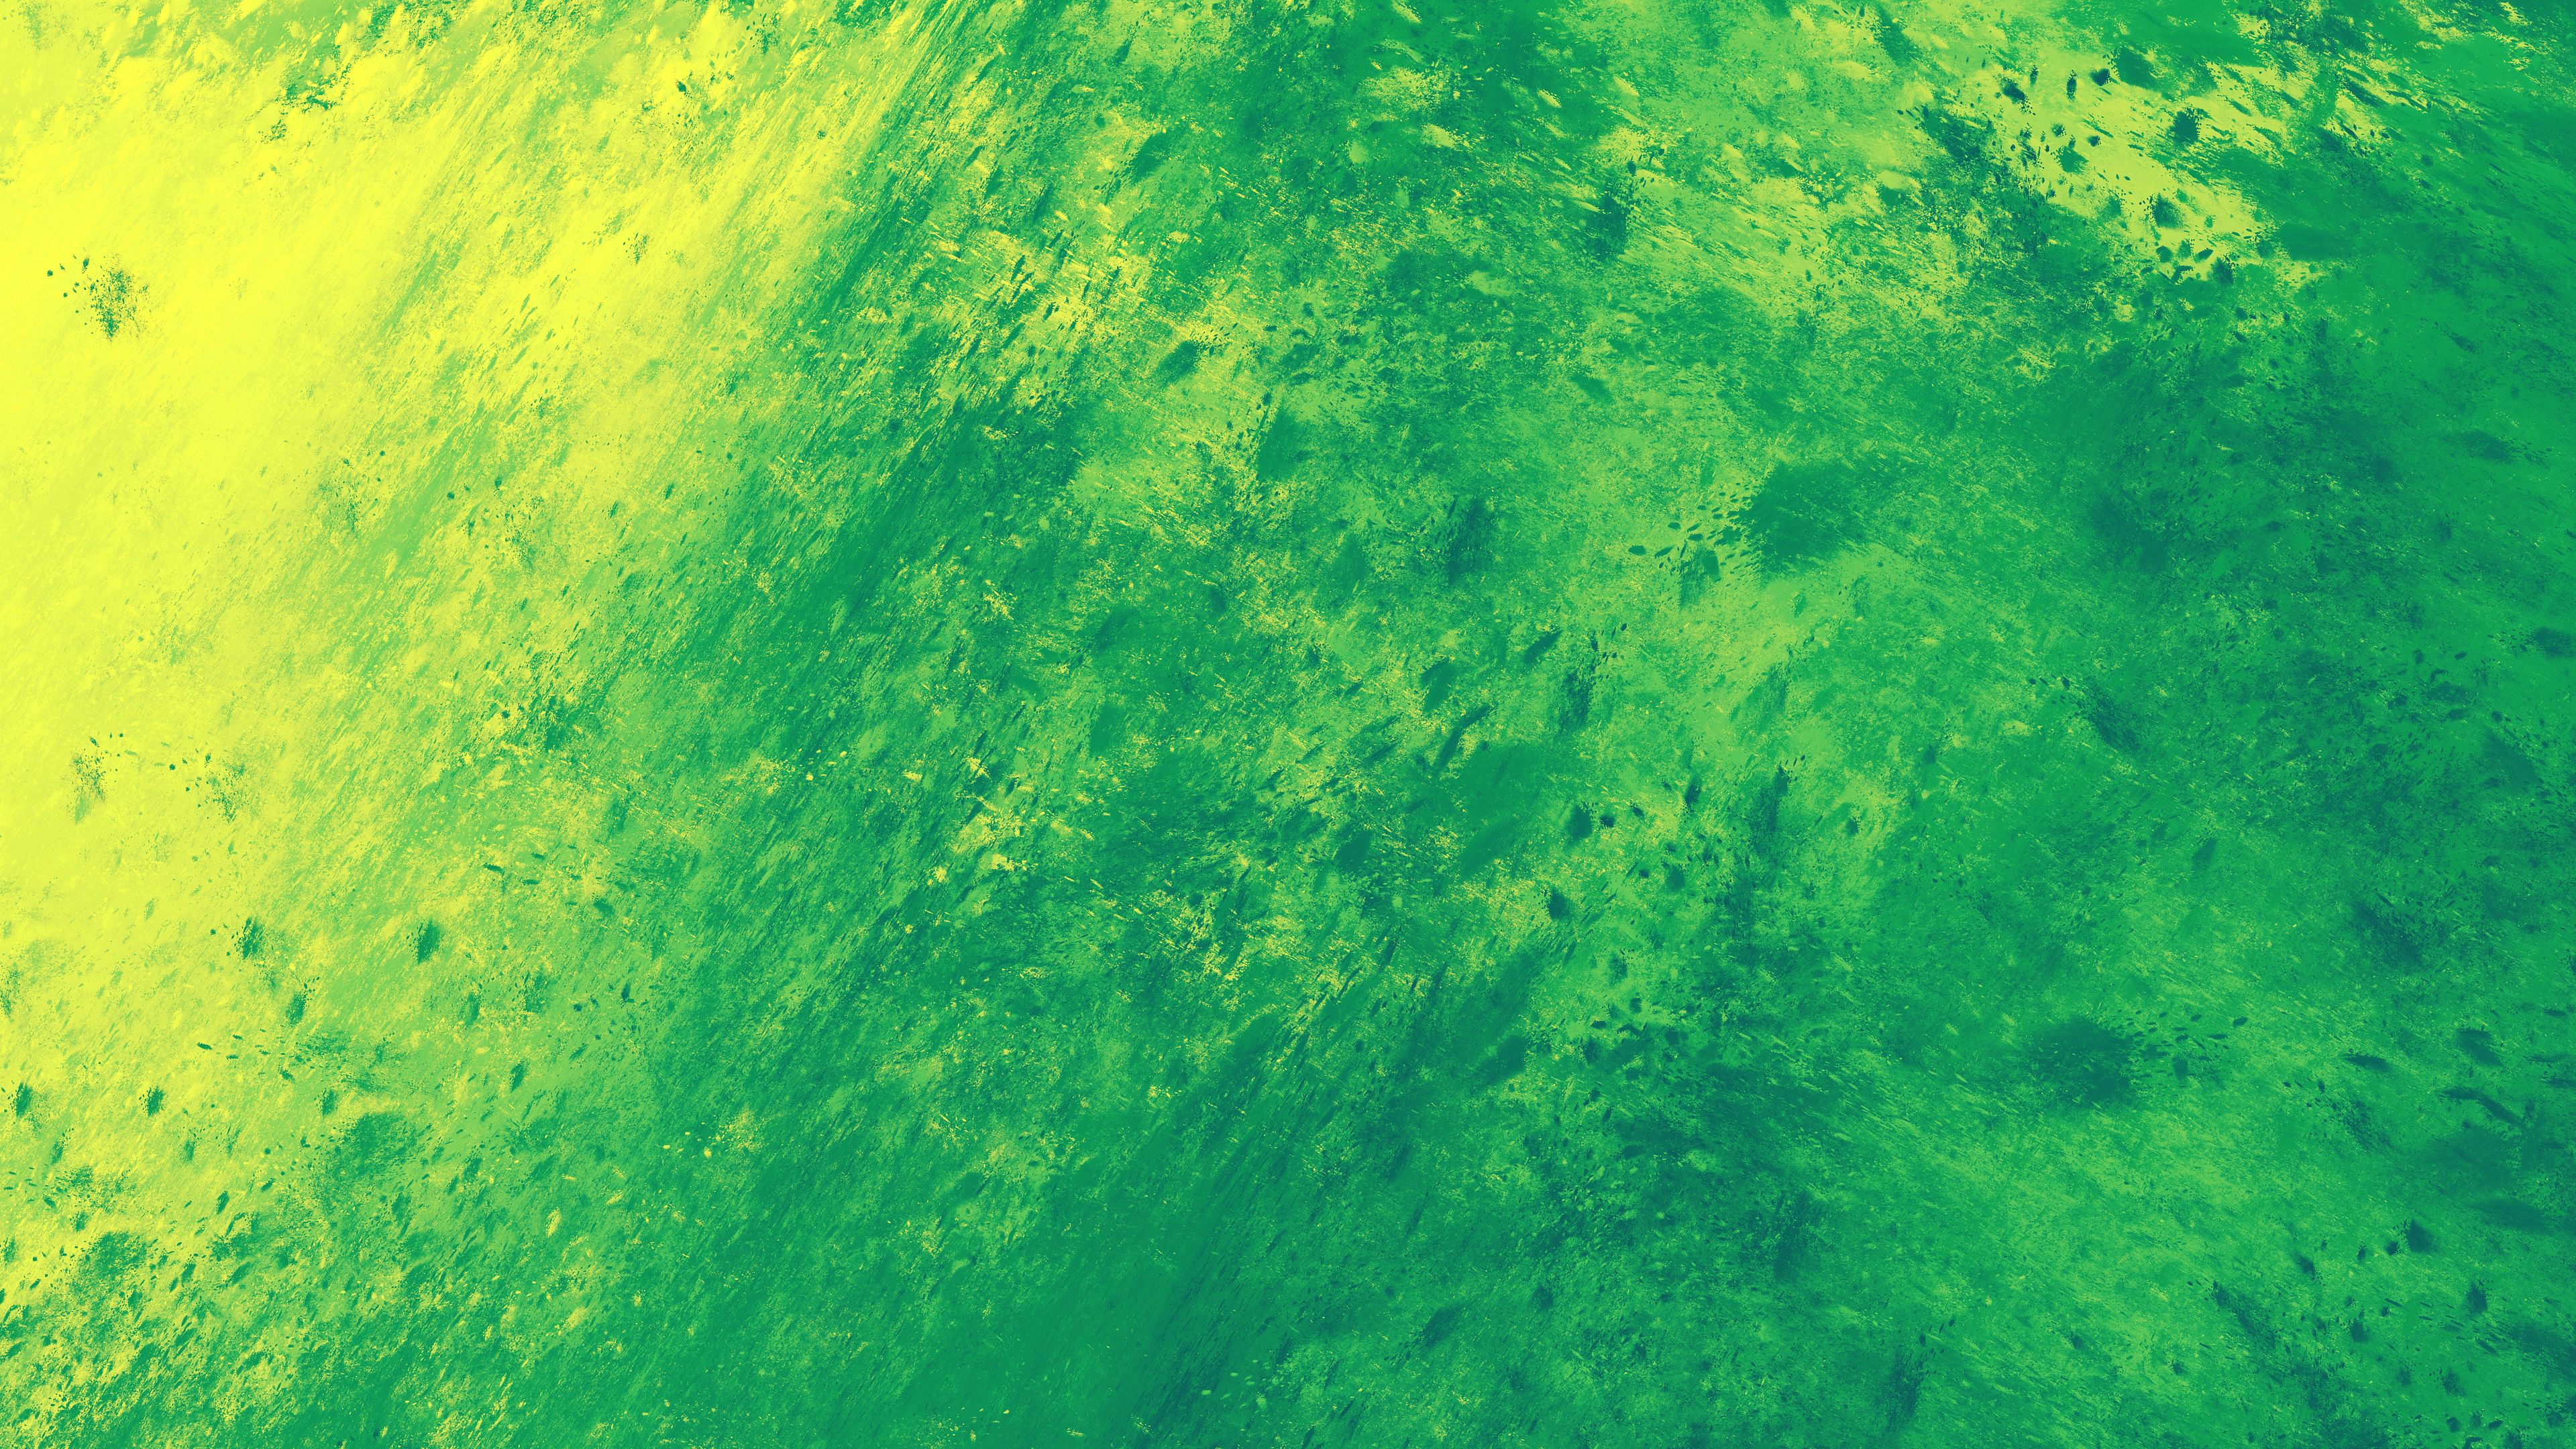 stains, green, abstract, yellow, spots, light green, salad iphone wallpaper